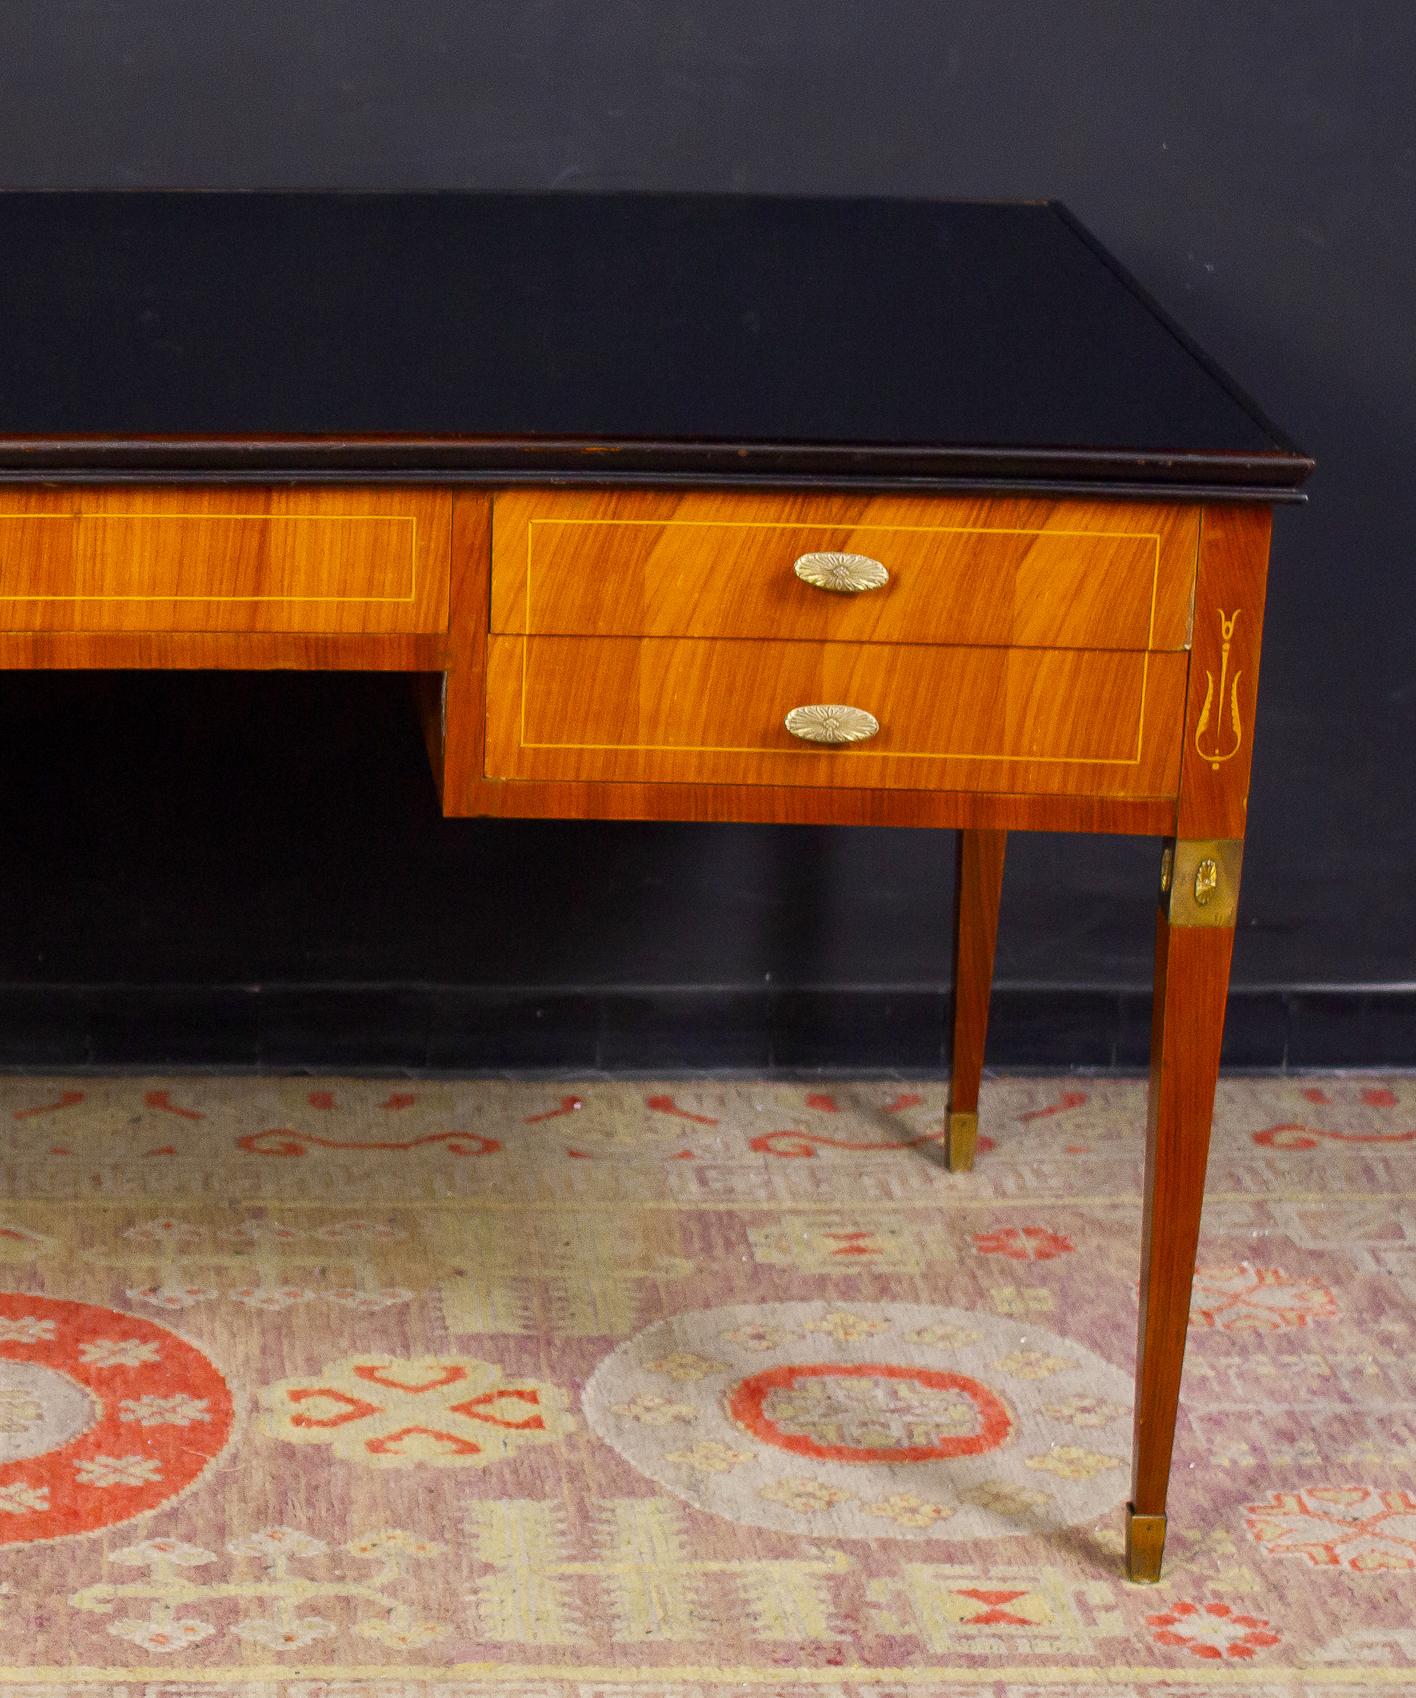 This impressive Italian executive desk with finished brass sabots, provided with five drawers.